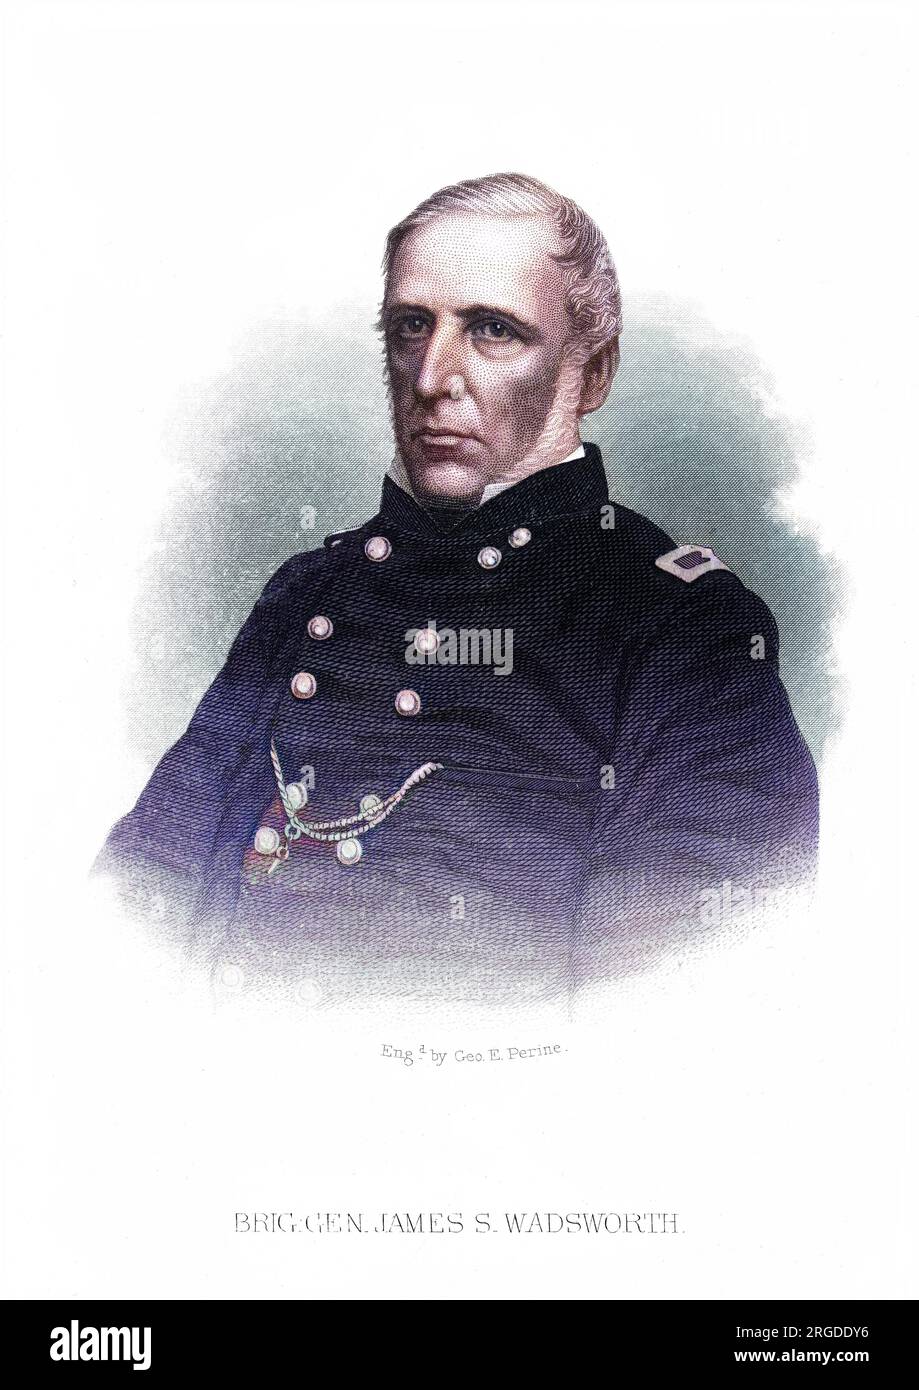 Brigadier=general JAMES SAMUEL WADSWORTH American soldier in the Union army, distinguished himself at Gettysburg but died of wounds sustained in the Wilderness. Stock Photo